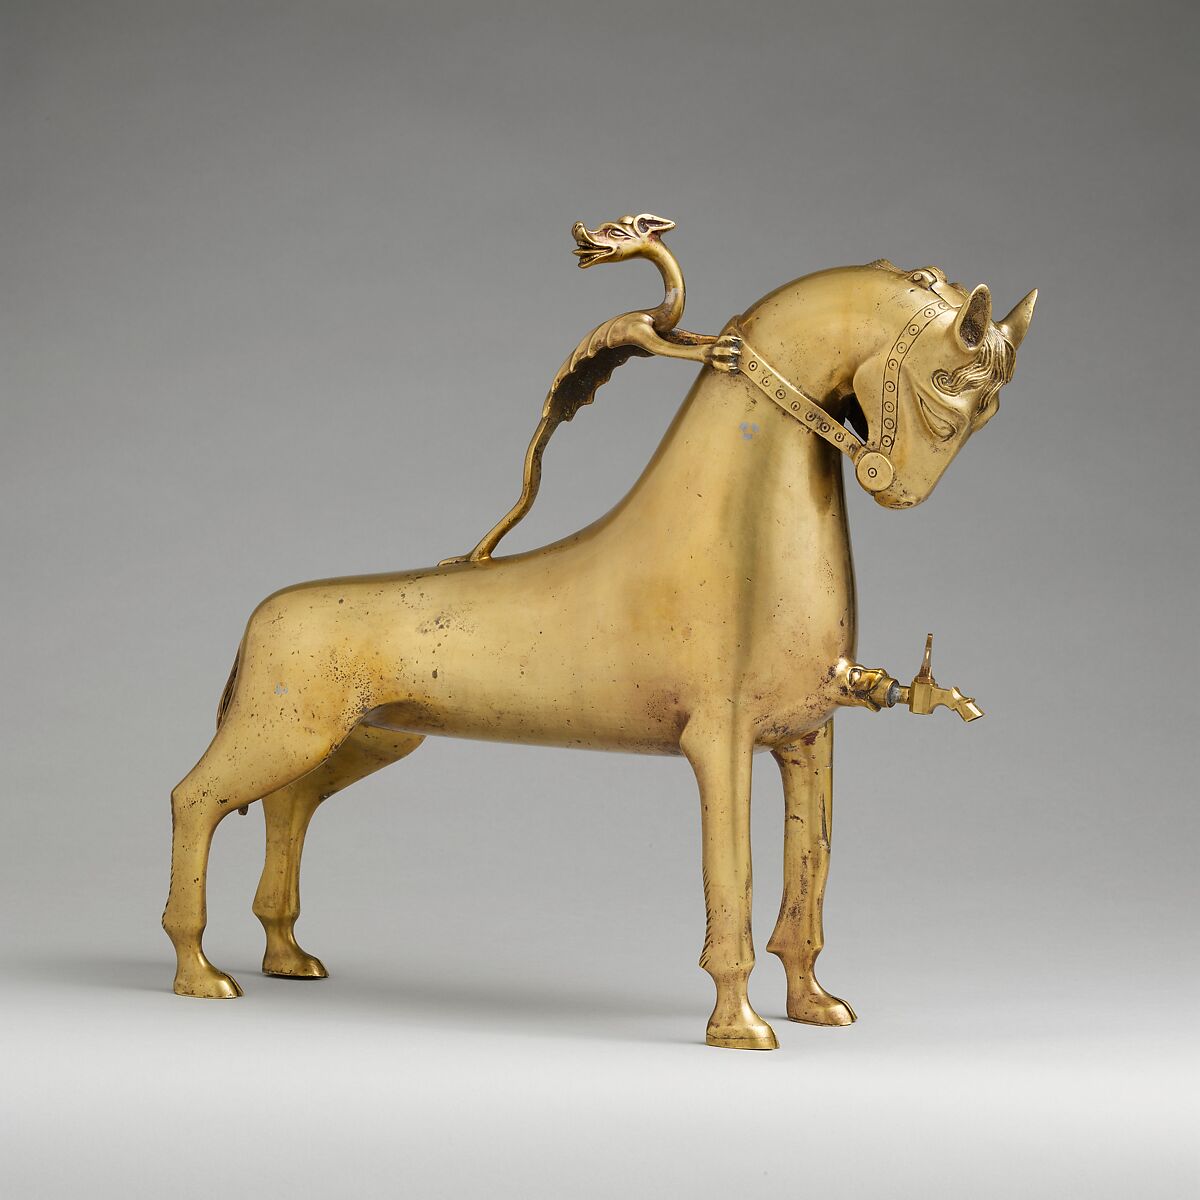 Aquamanile in the Form of a Horse, Copper alloy, German 